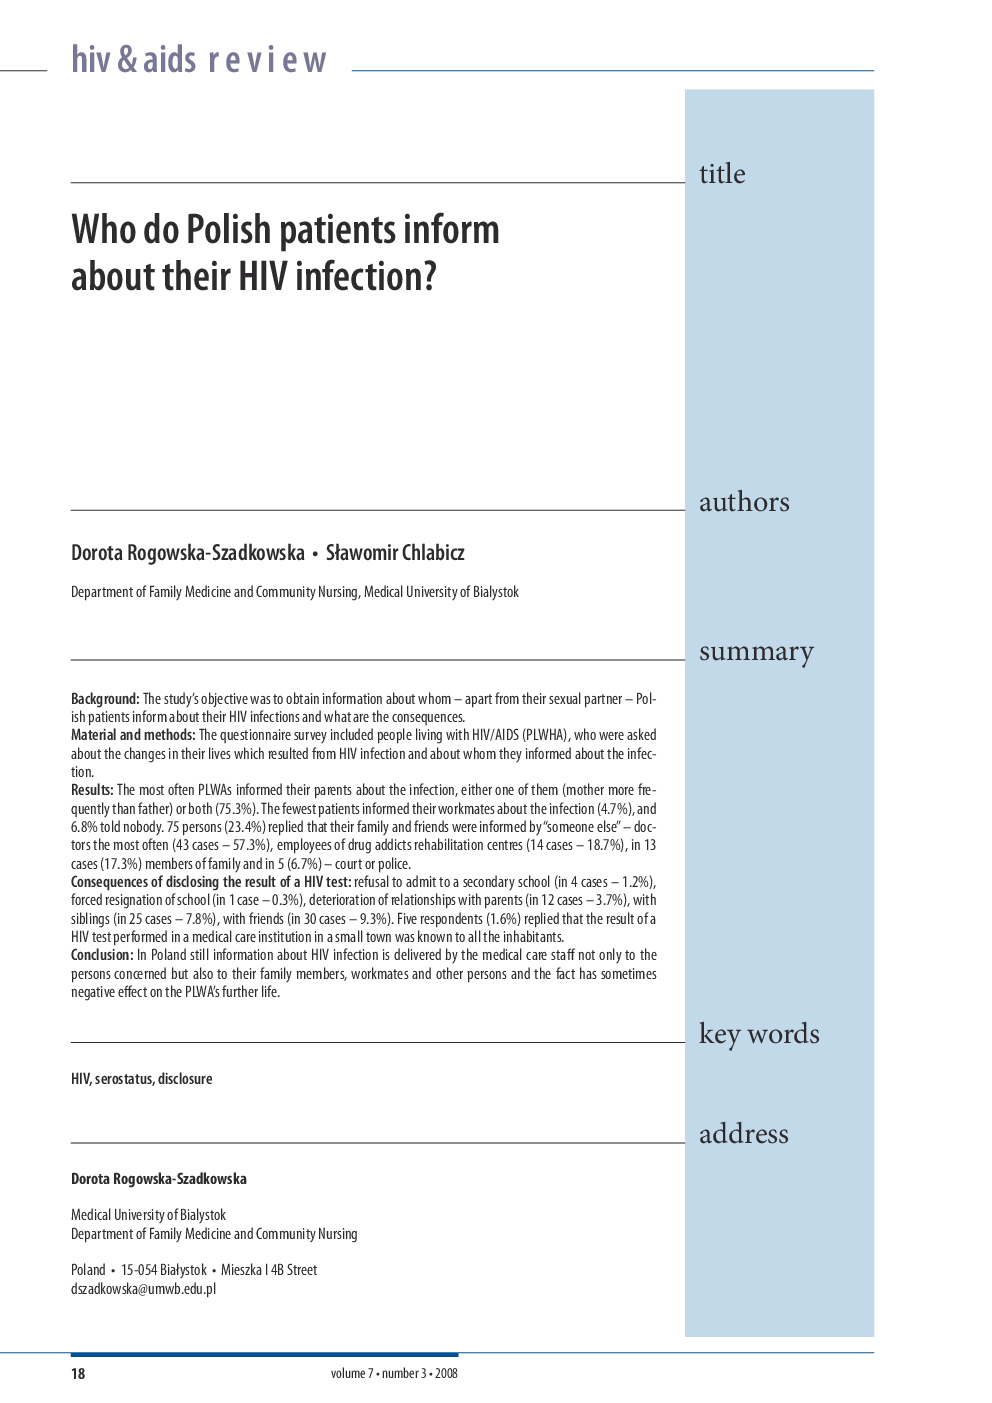 Who do Polish patients inform about their HIV infection?